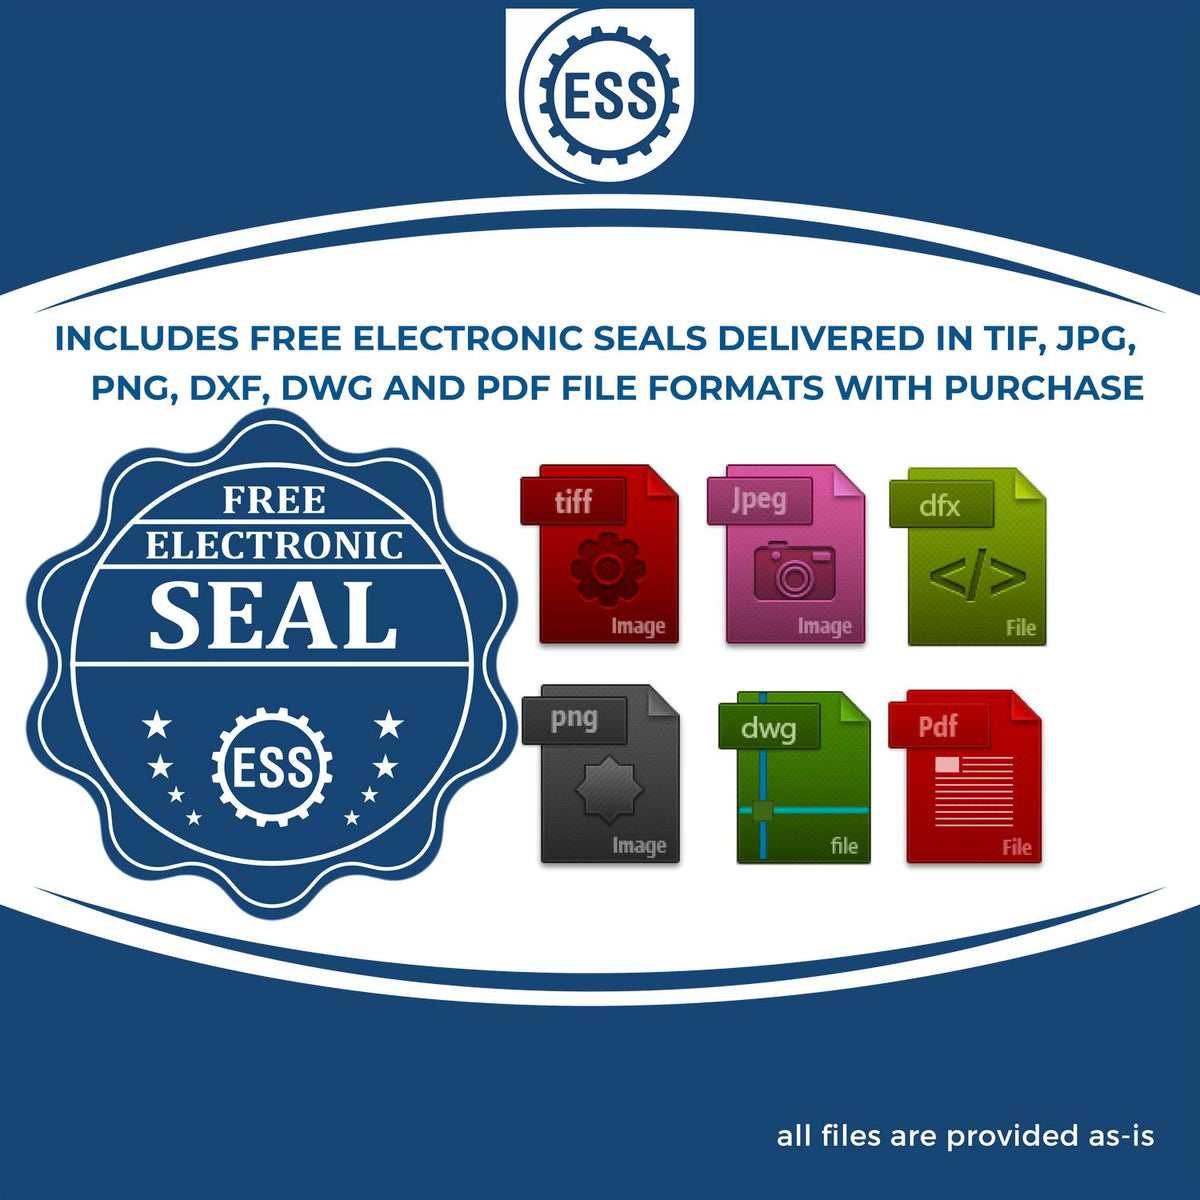 An infographic for the free electronic seal for the Maine Engineer Desk Seal illustrating the different file type icons such as DXF, DWG, TIF, JPG and PNG.